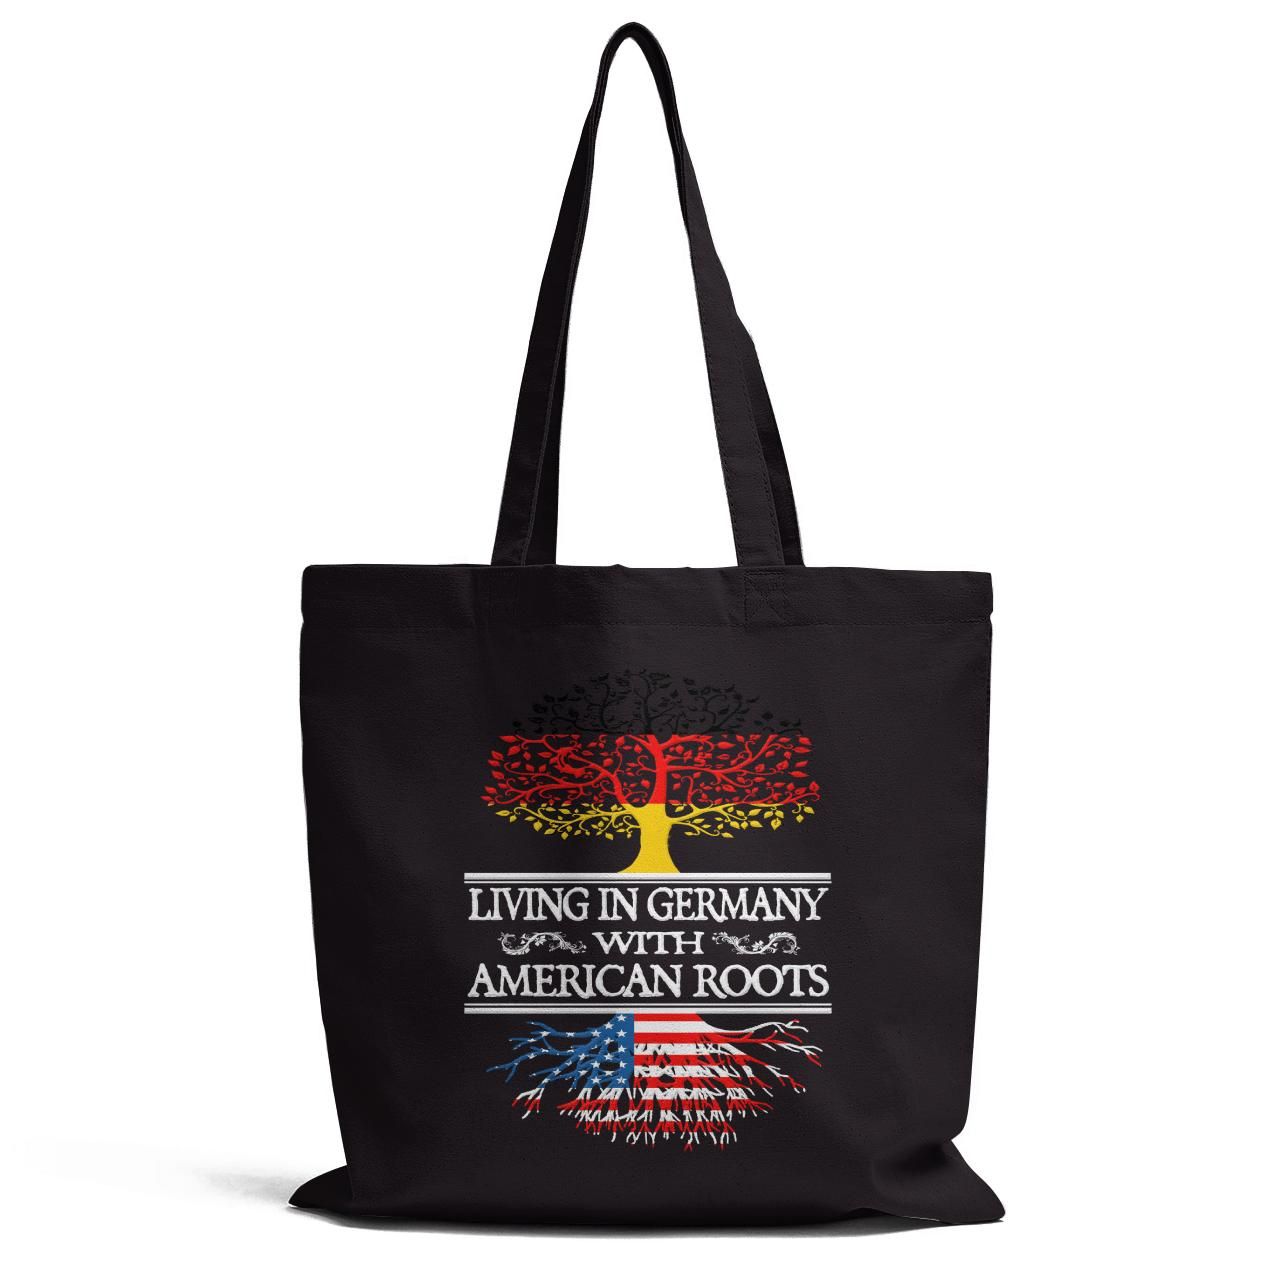 Living In Germany With American Roots Tote Bag